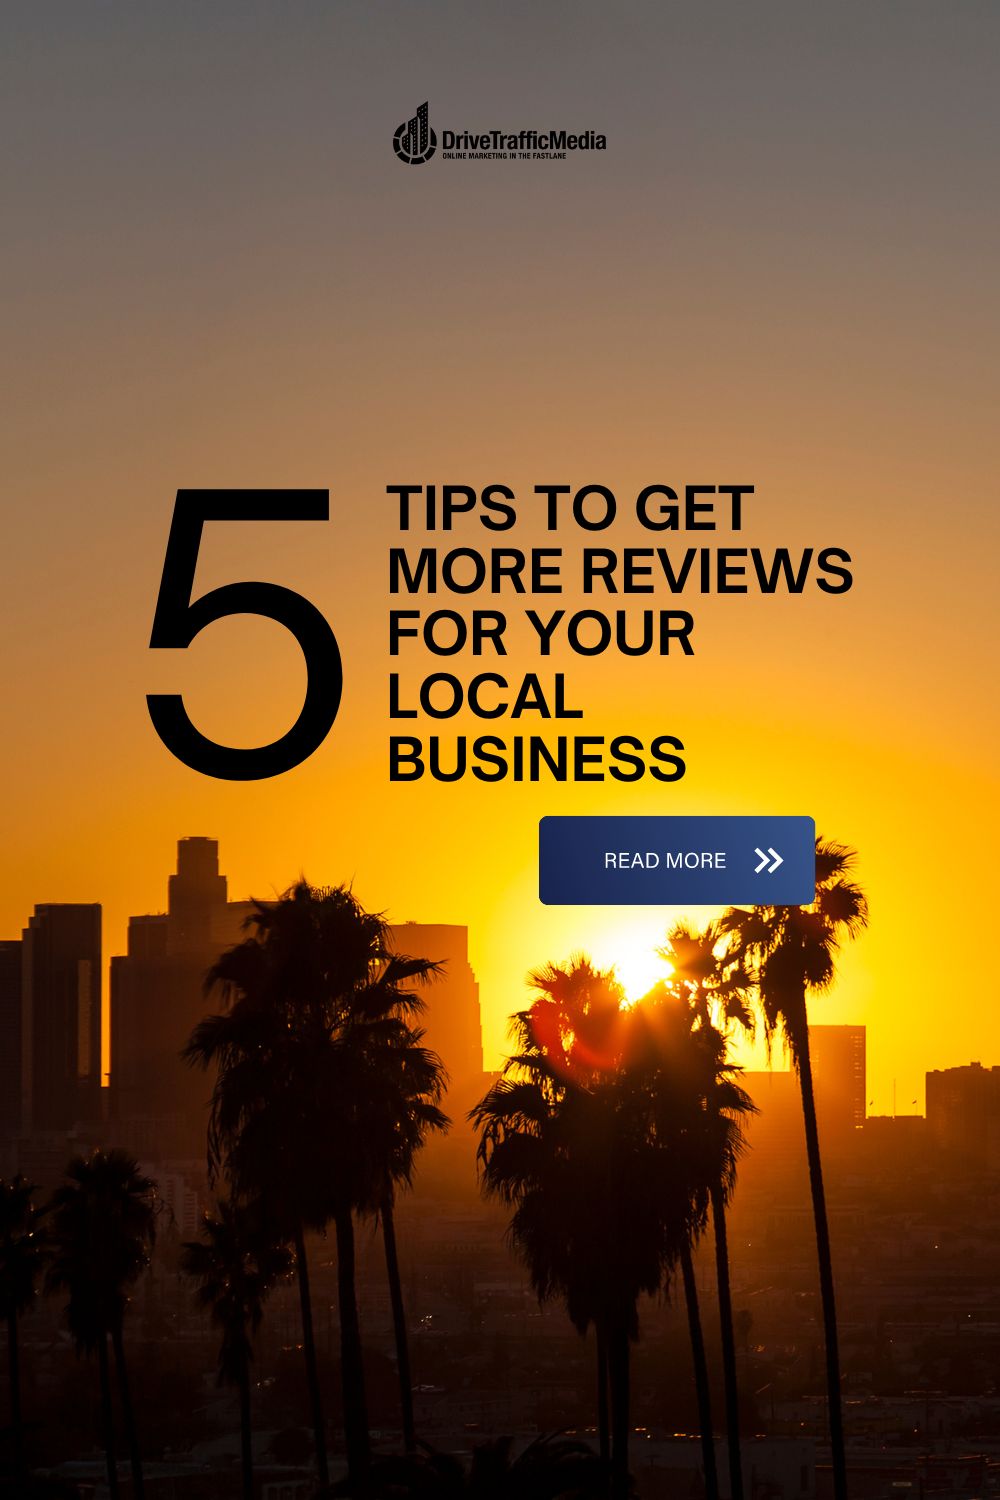 Drive Traffic Media, a digital marketing agency serving Los Angeles and Orange County, imparts ways on how to get more online reviews for your business.